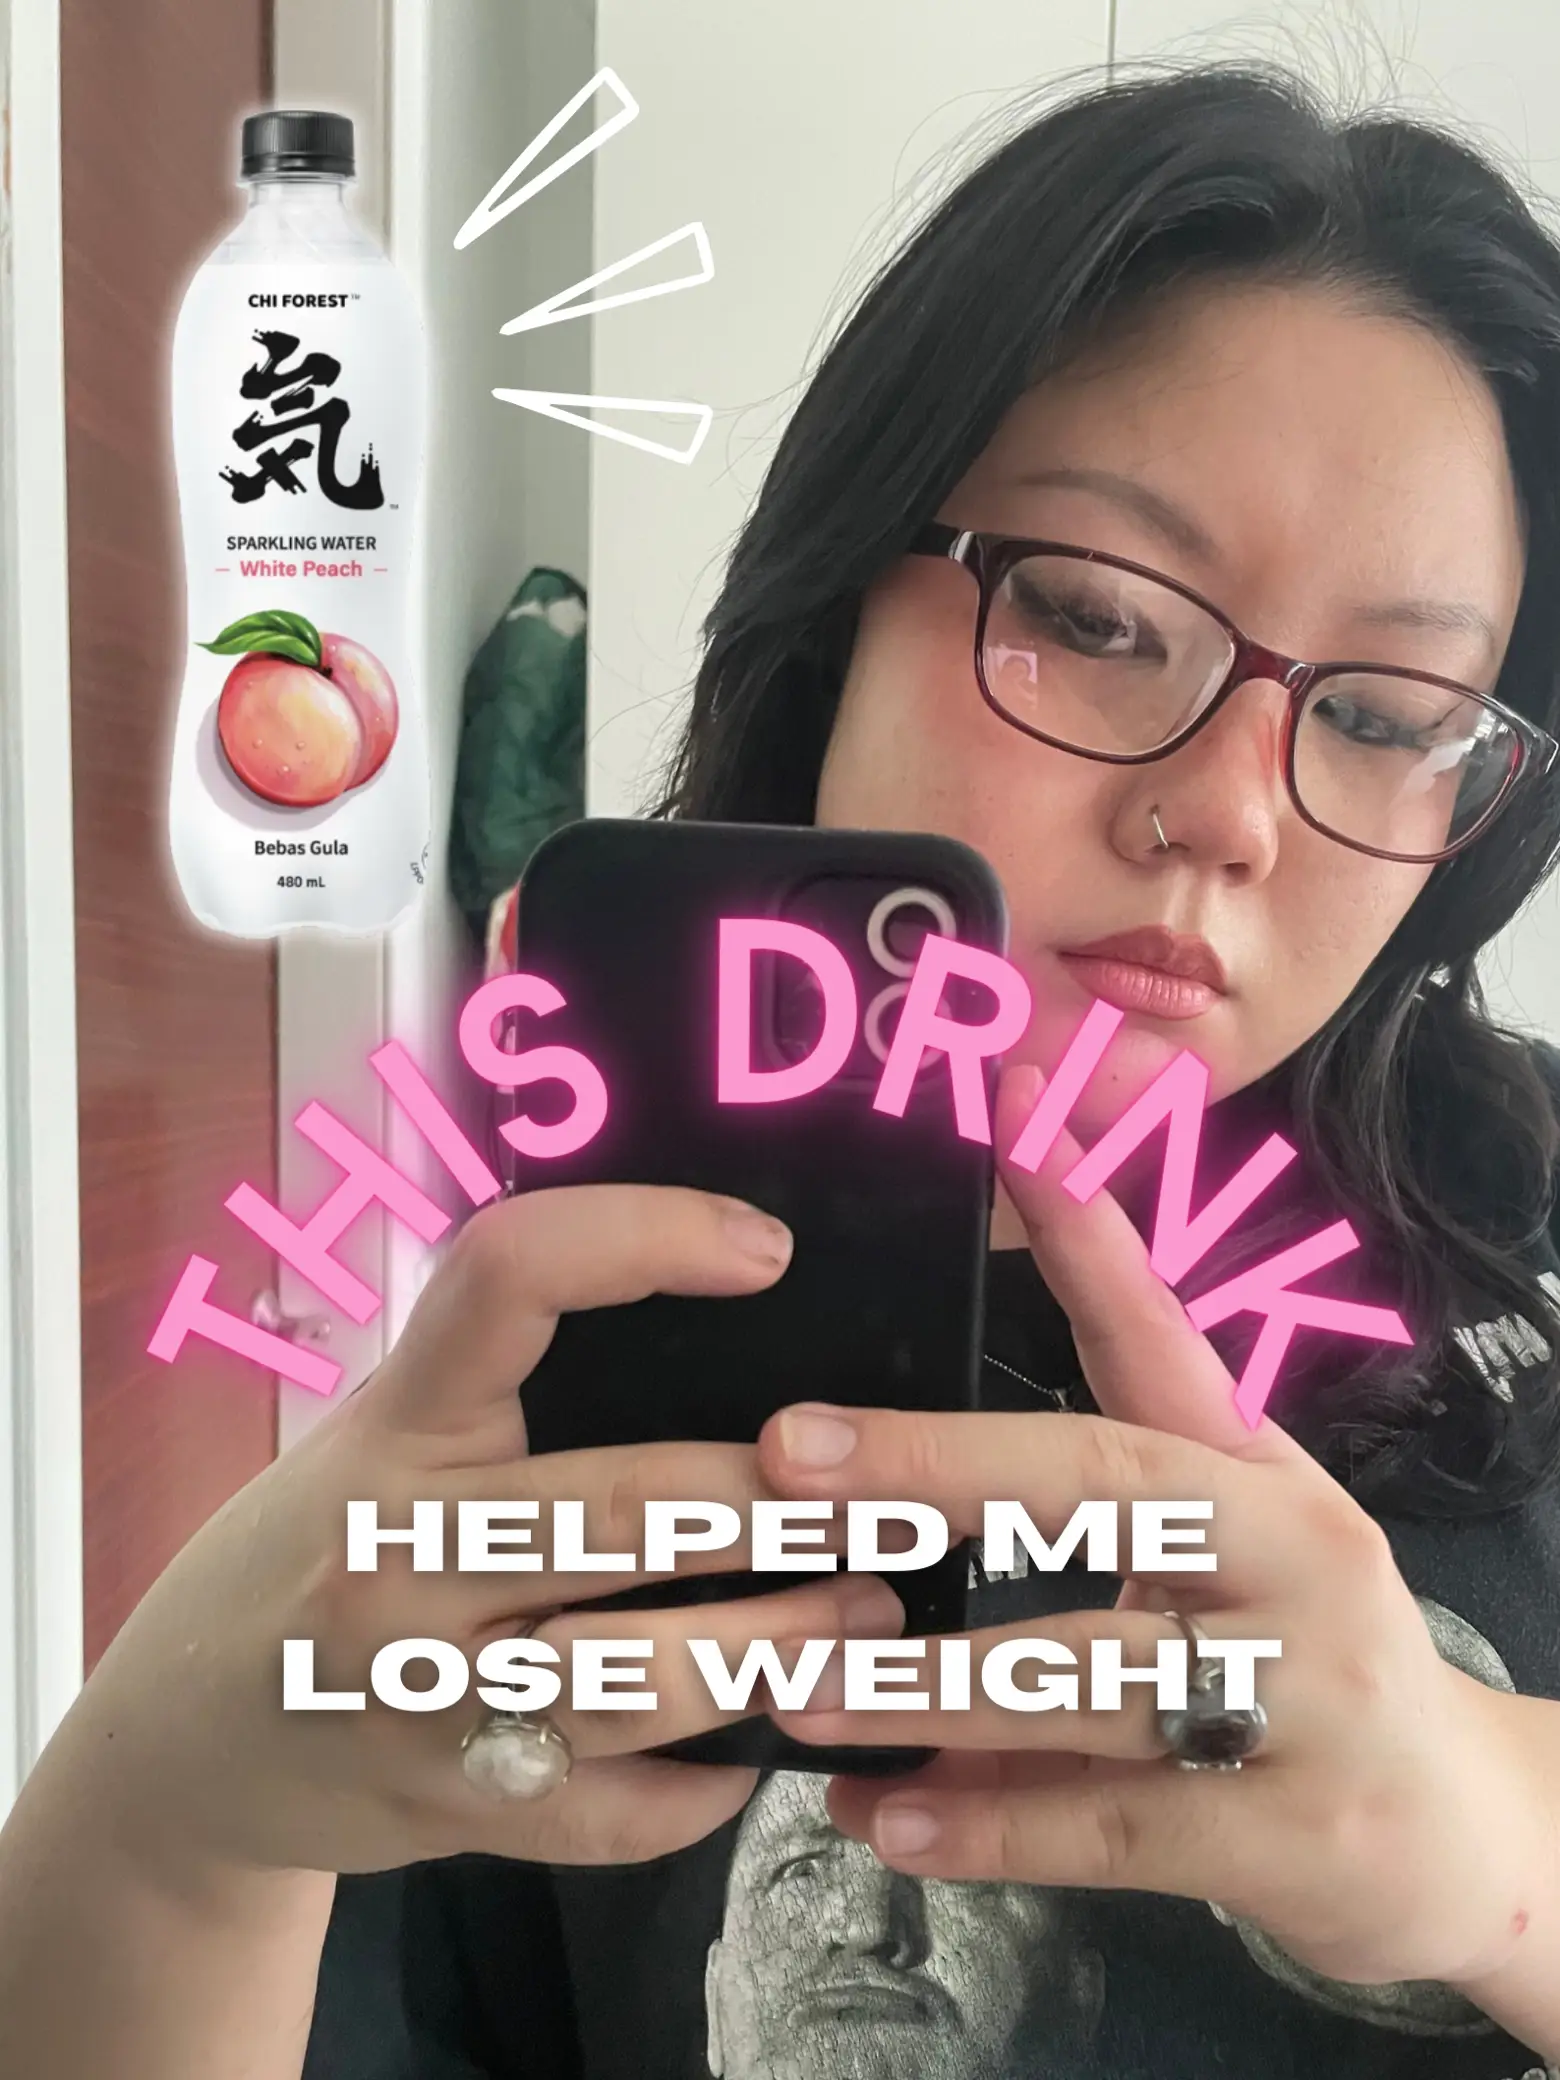 this drink helped me lose 10kg 😮‍💨's images